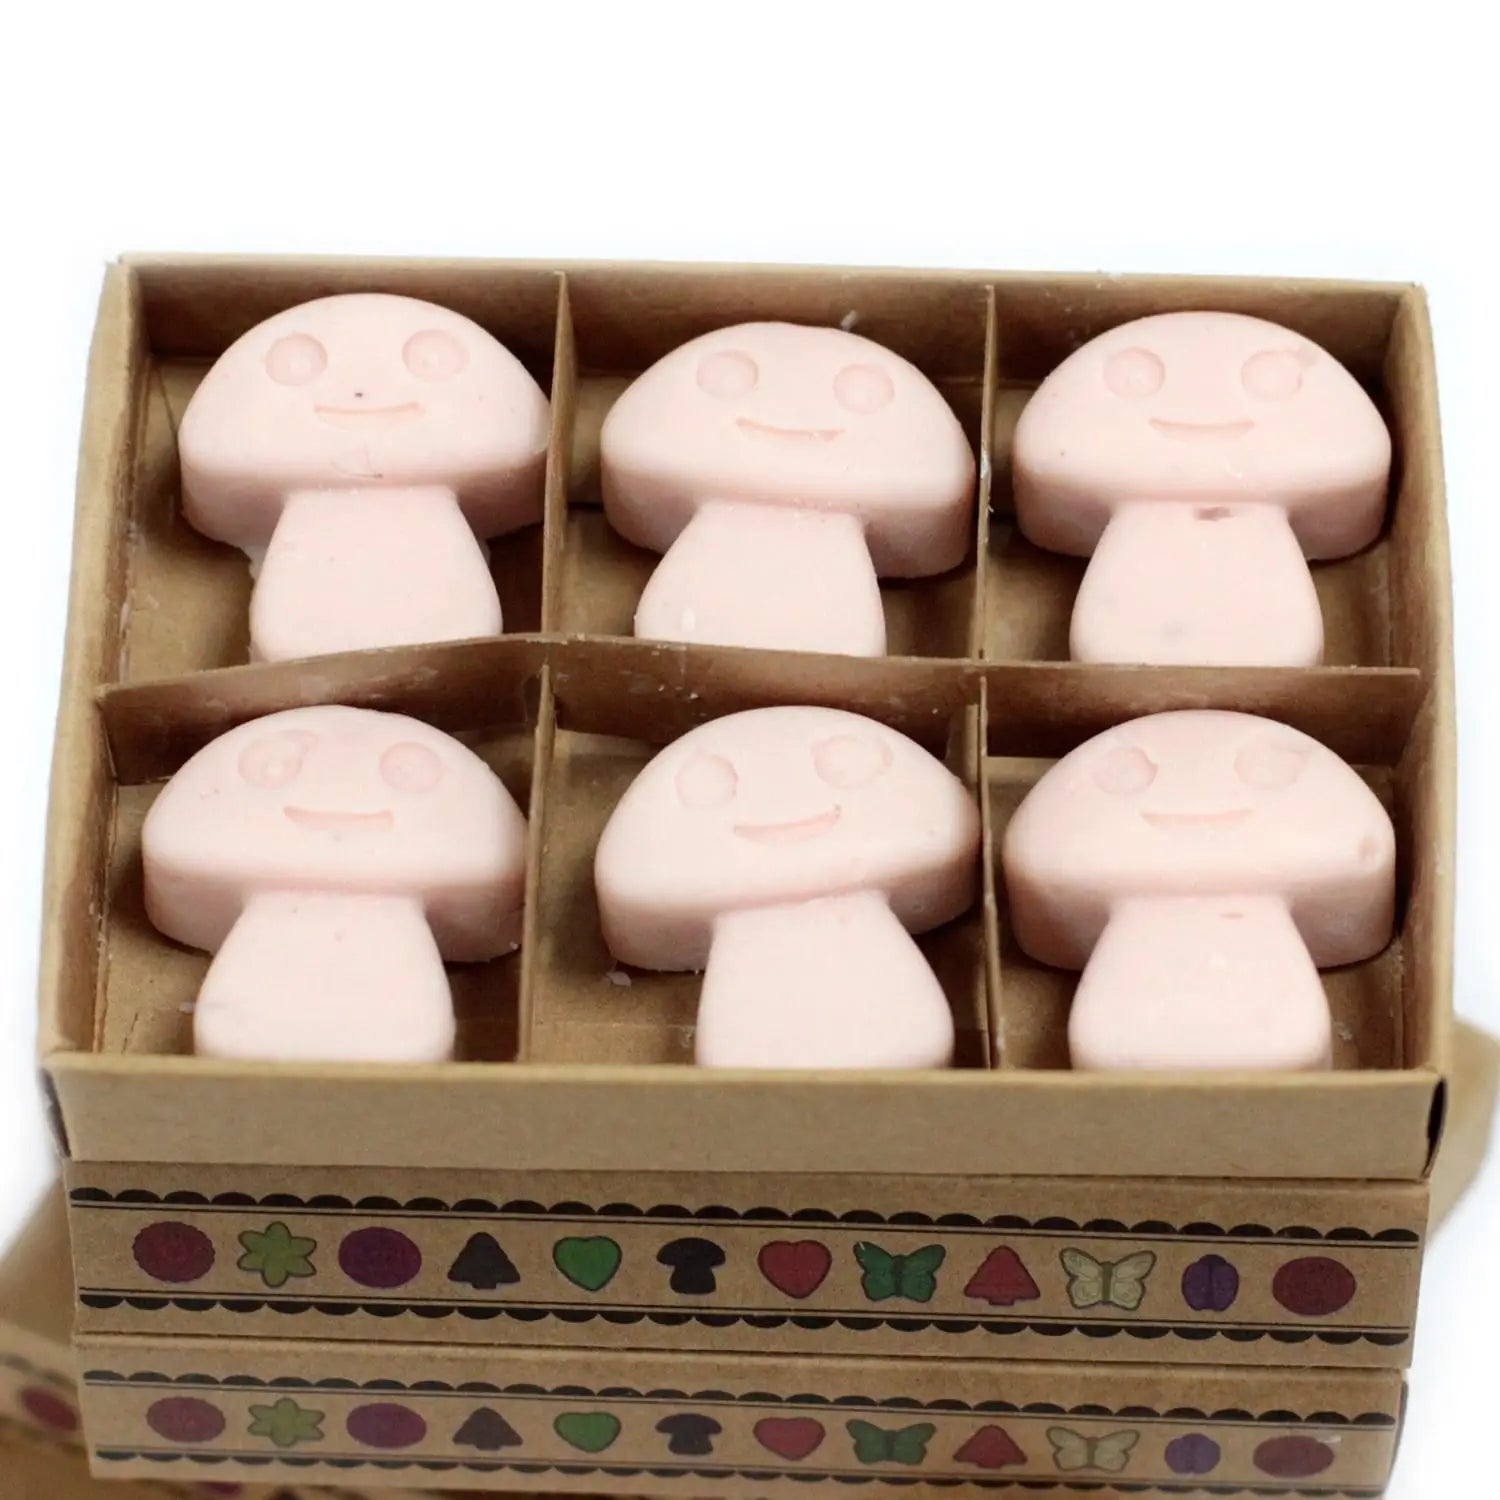 Aromatherapy Colourful Shaped Soy Wax Melts